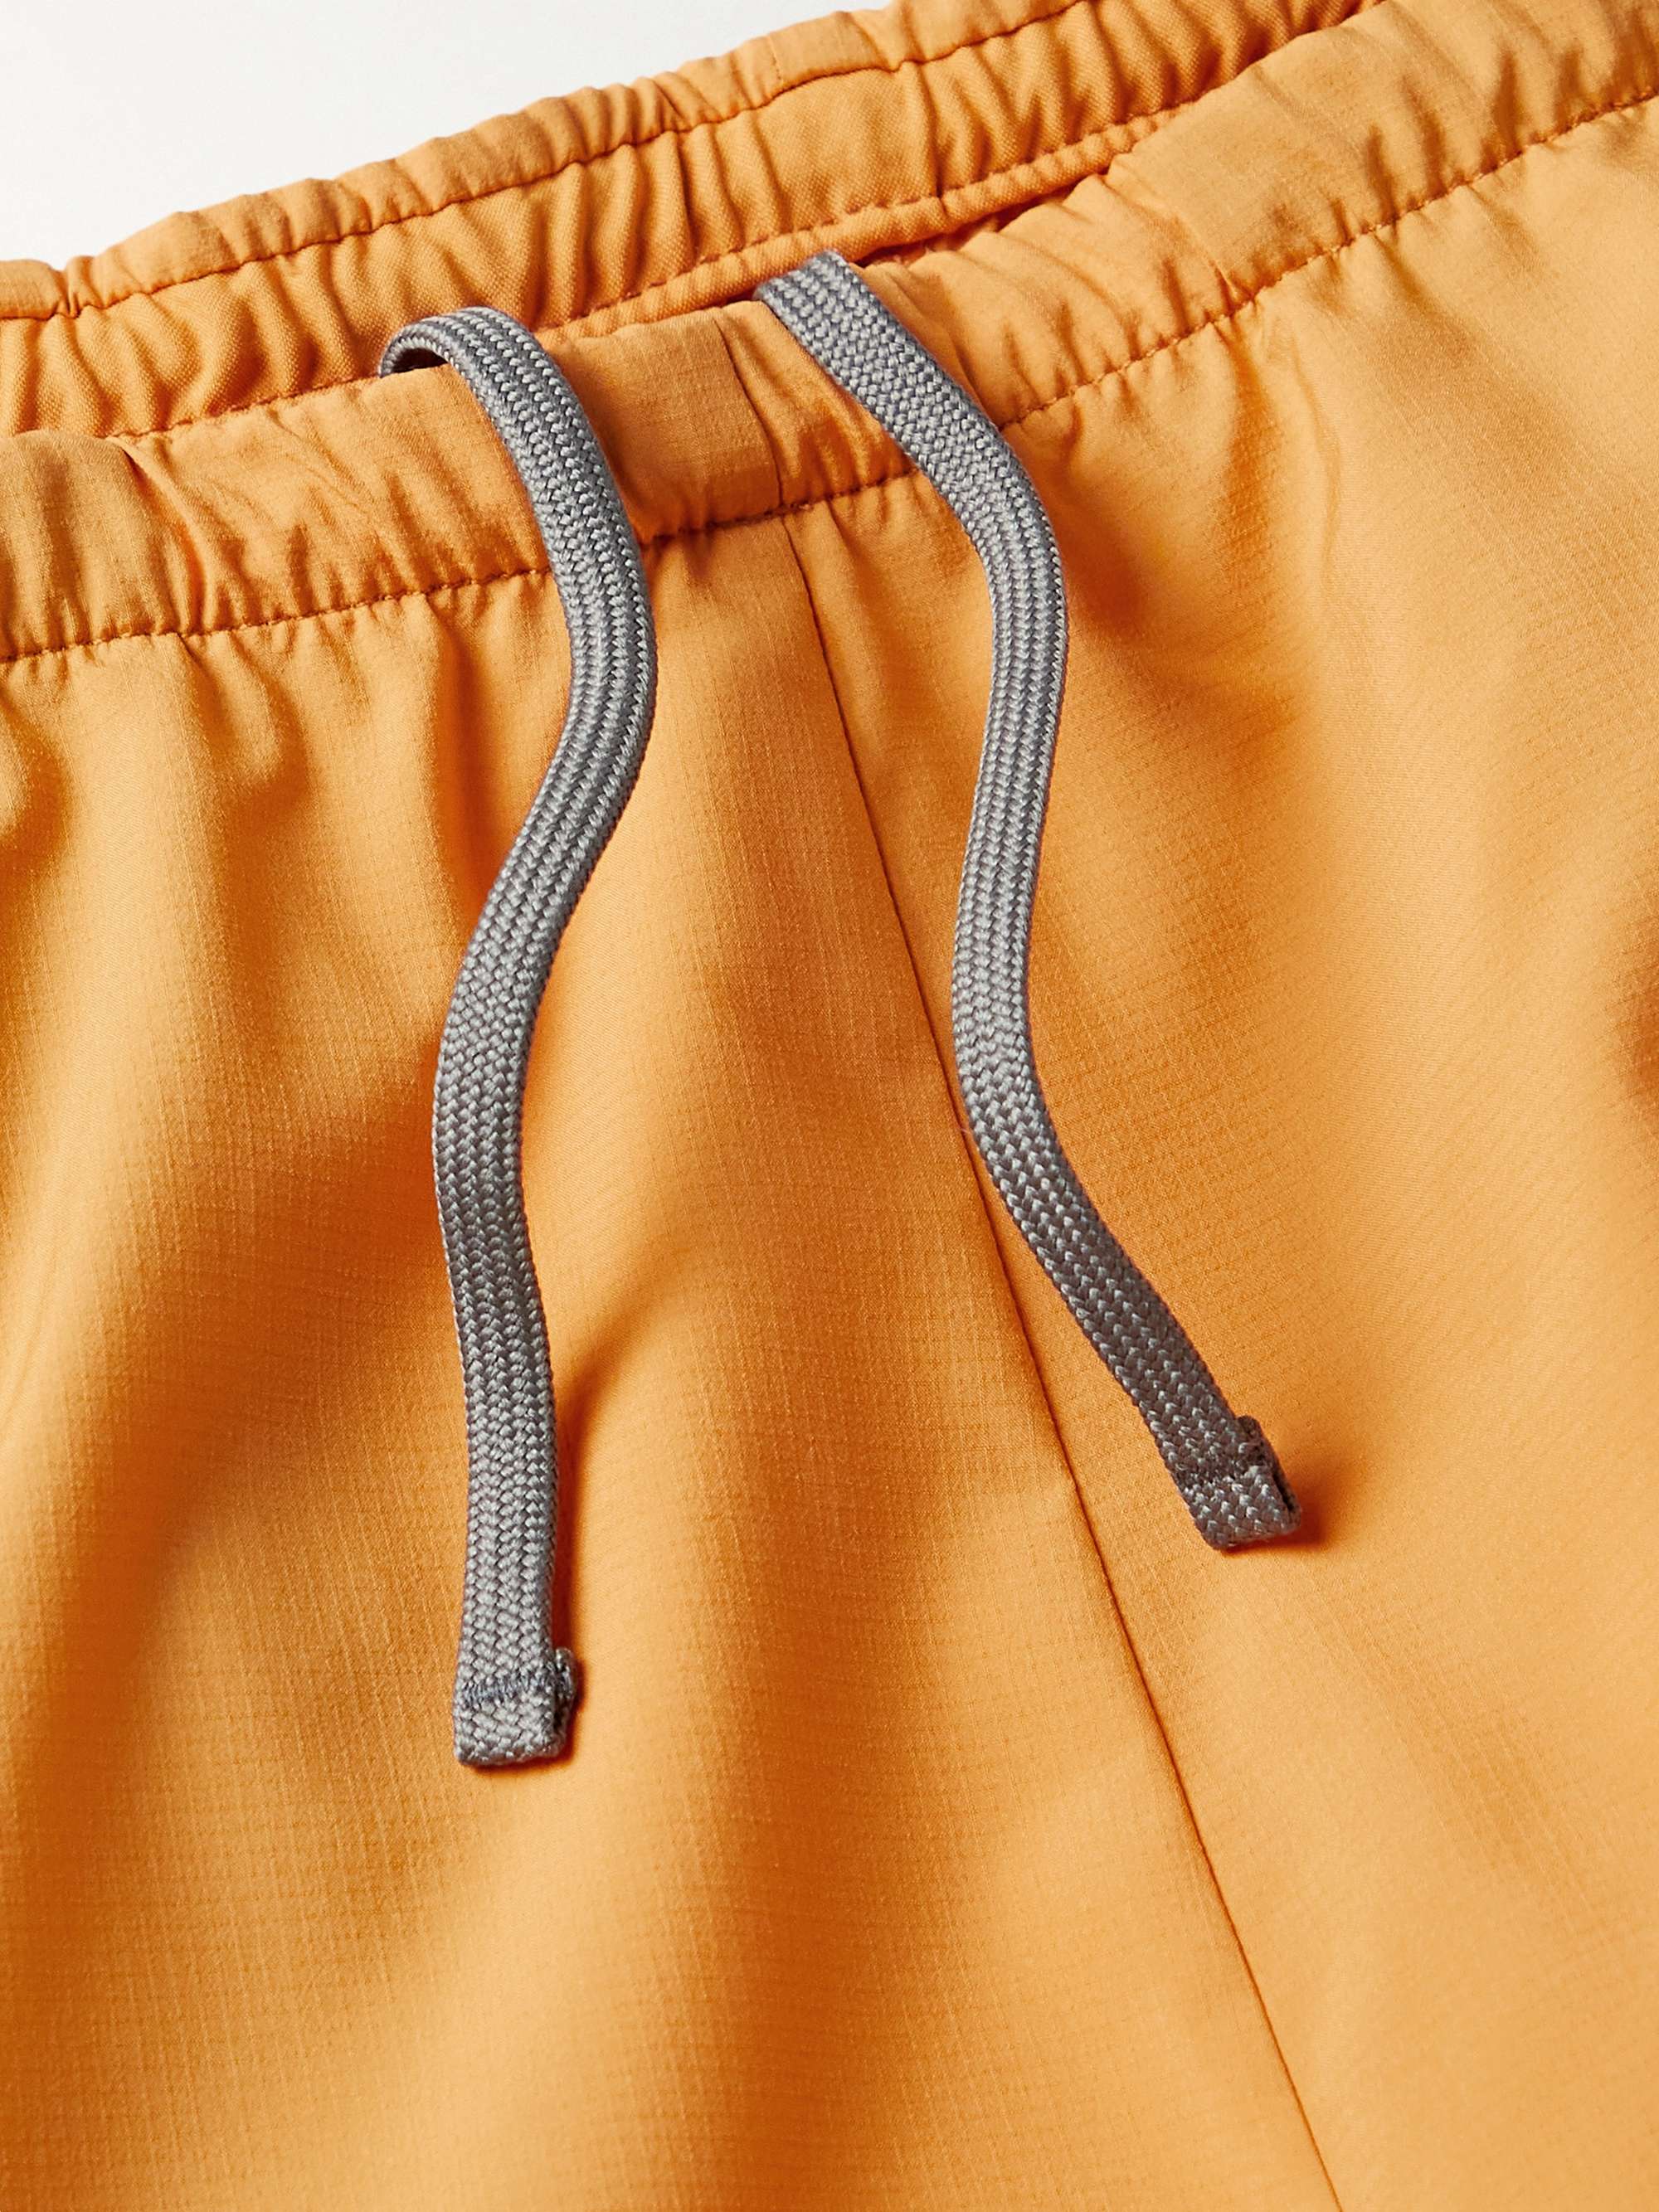 HOUDINI Pace Wind Recycled C9 Ripstop Shorts